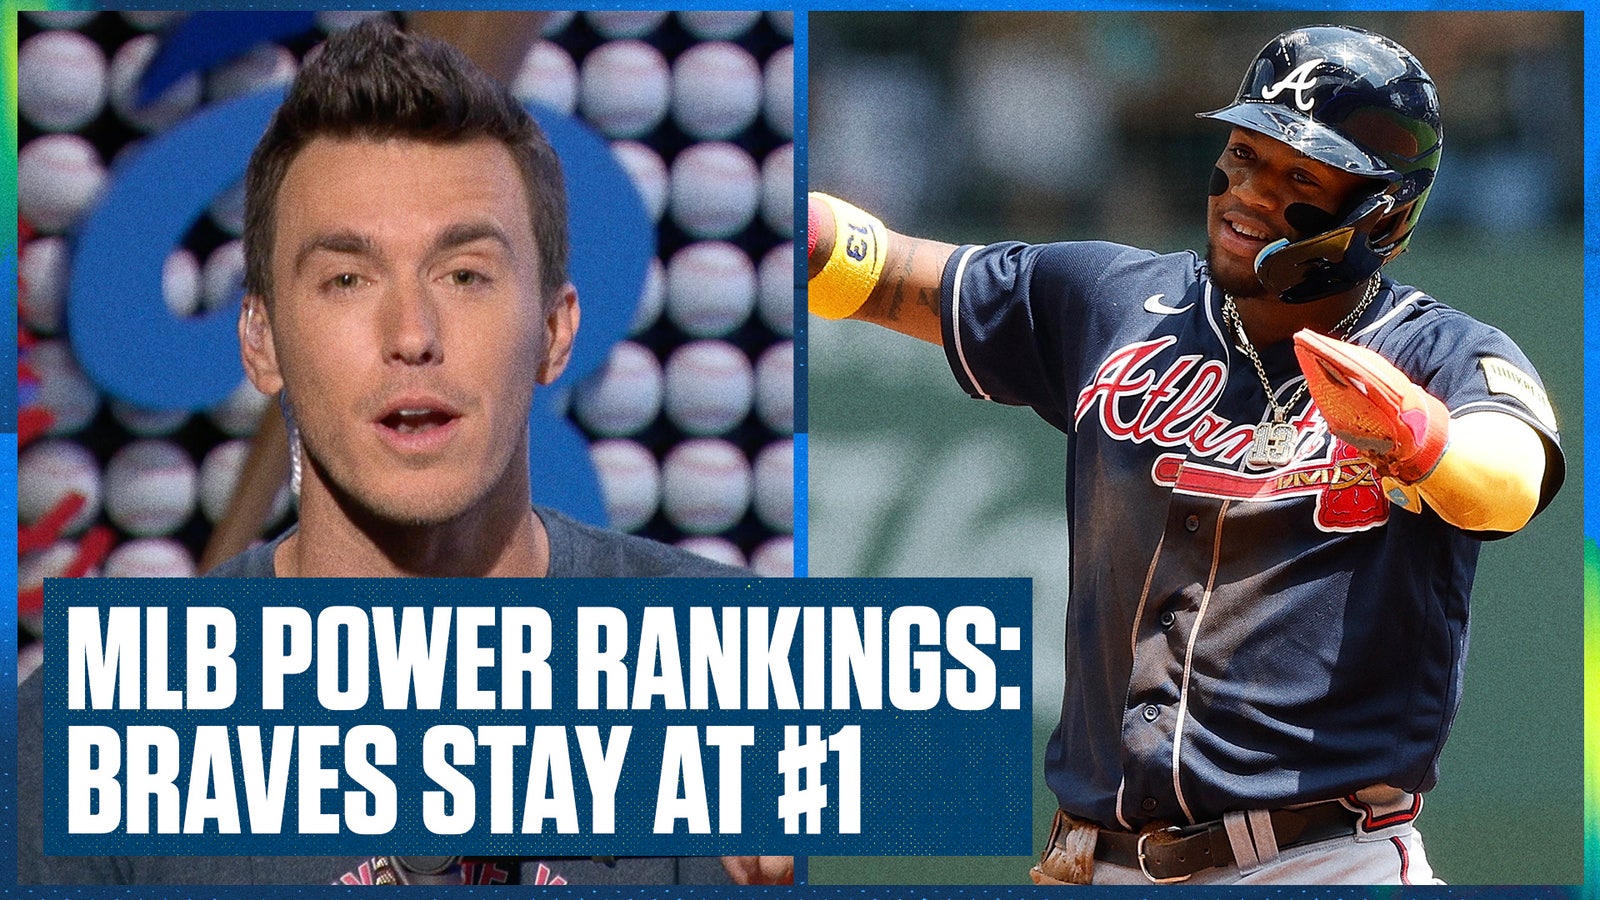 MLB West Power Rankings: Can Dodgers finally win World Series